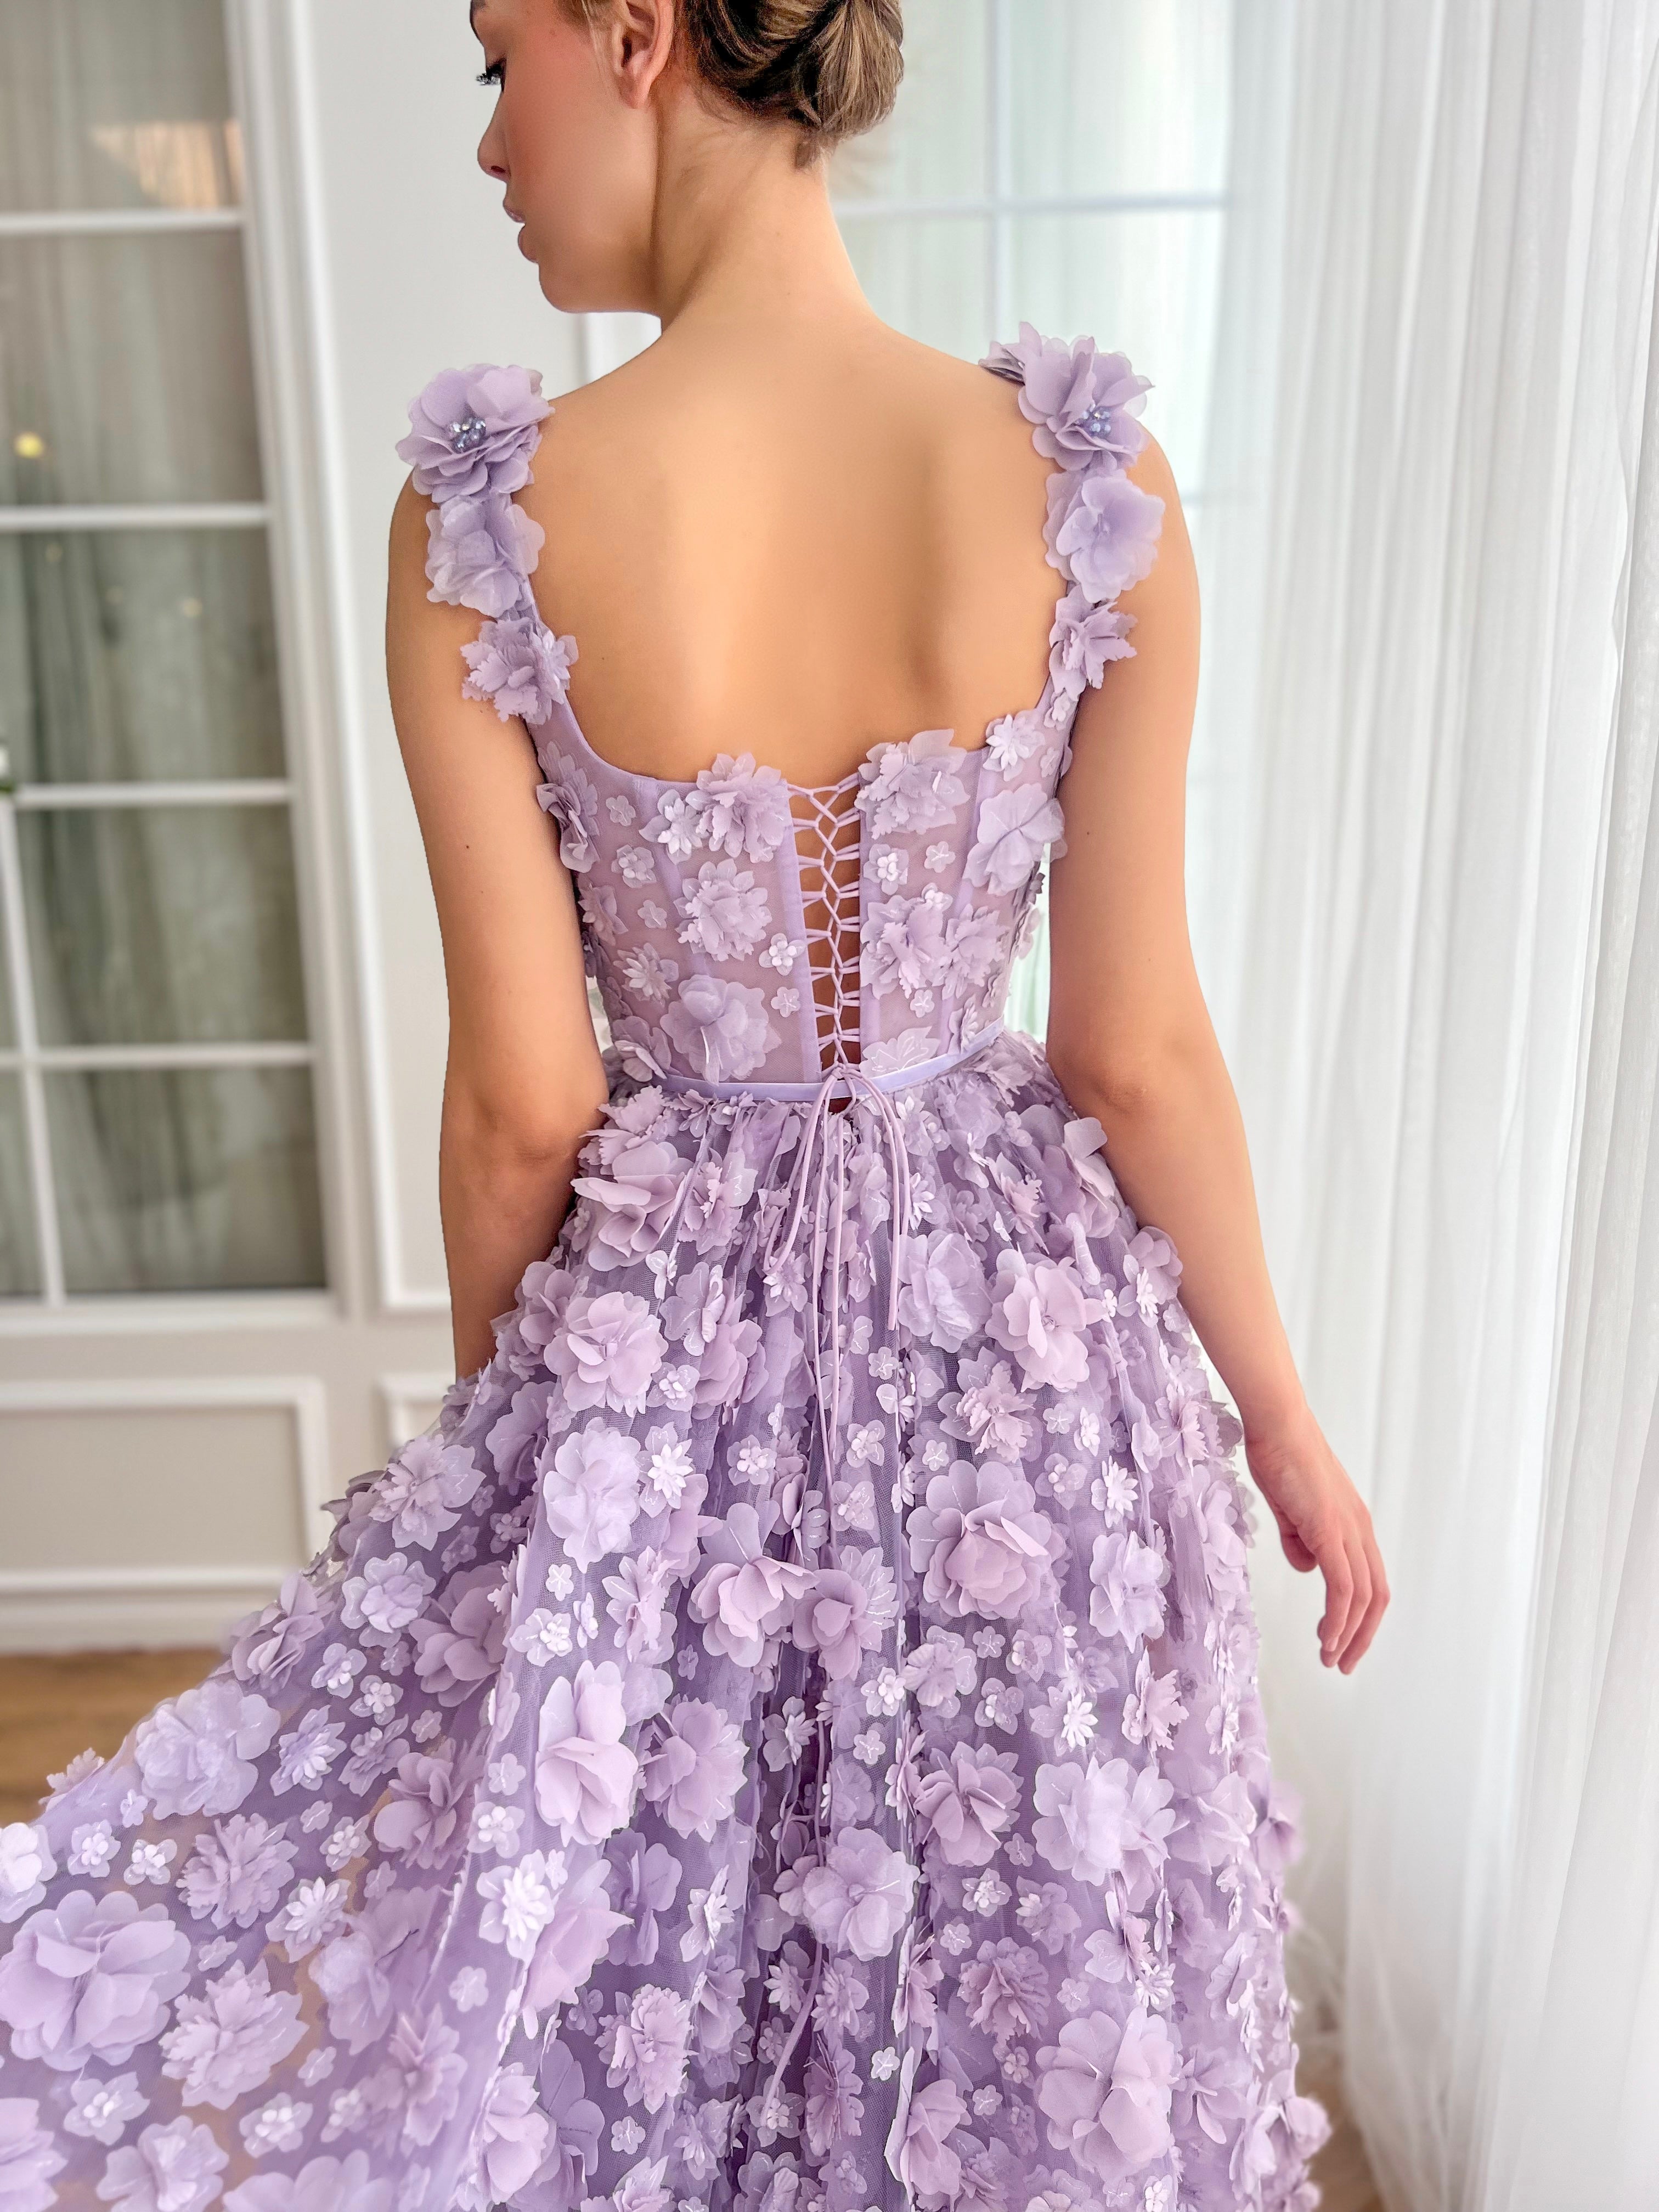 Purple A-Line dress with embroidered flowers and spaghetti straps